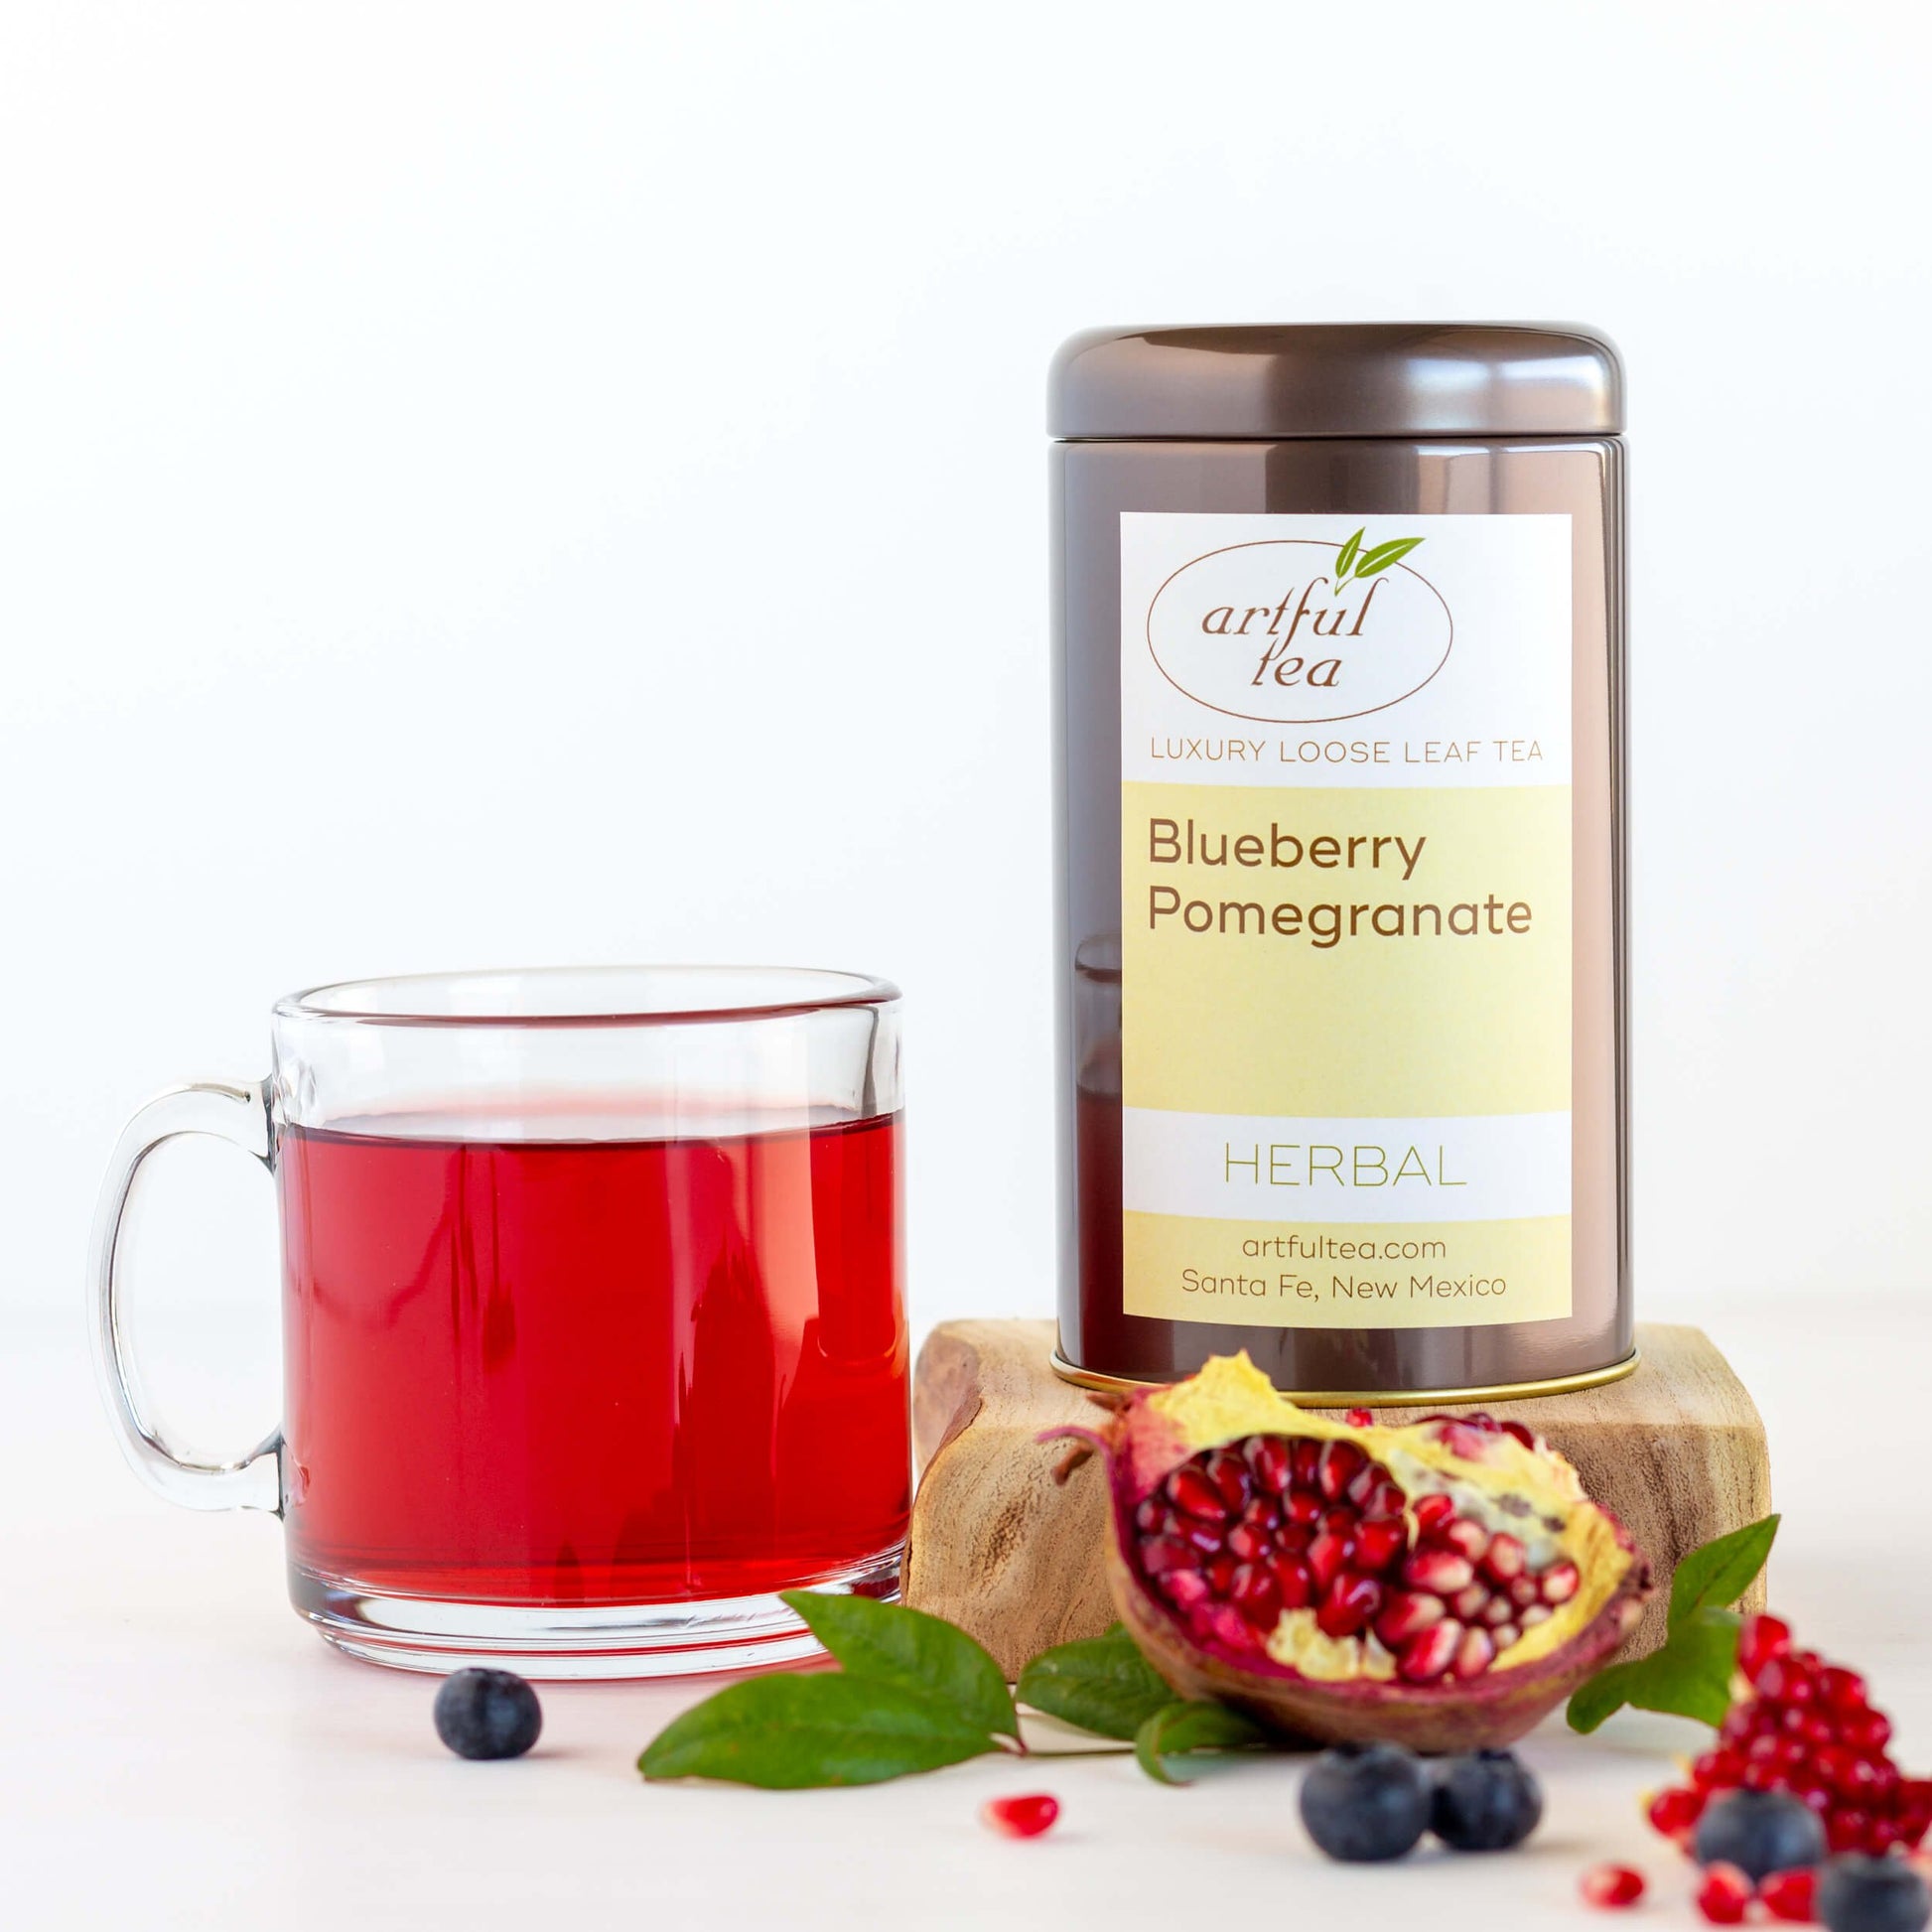 Blueberry Pomegranate Herbal Tea shown packaged in a brown tin, next to a glass mug of brewed tea, with an open pomegranate in the foreground 